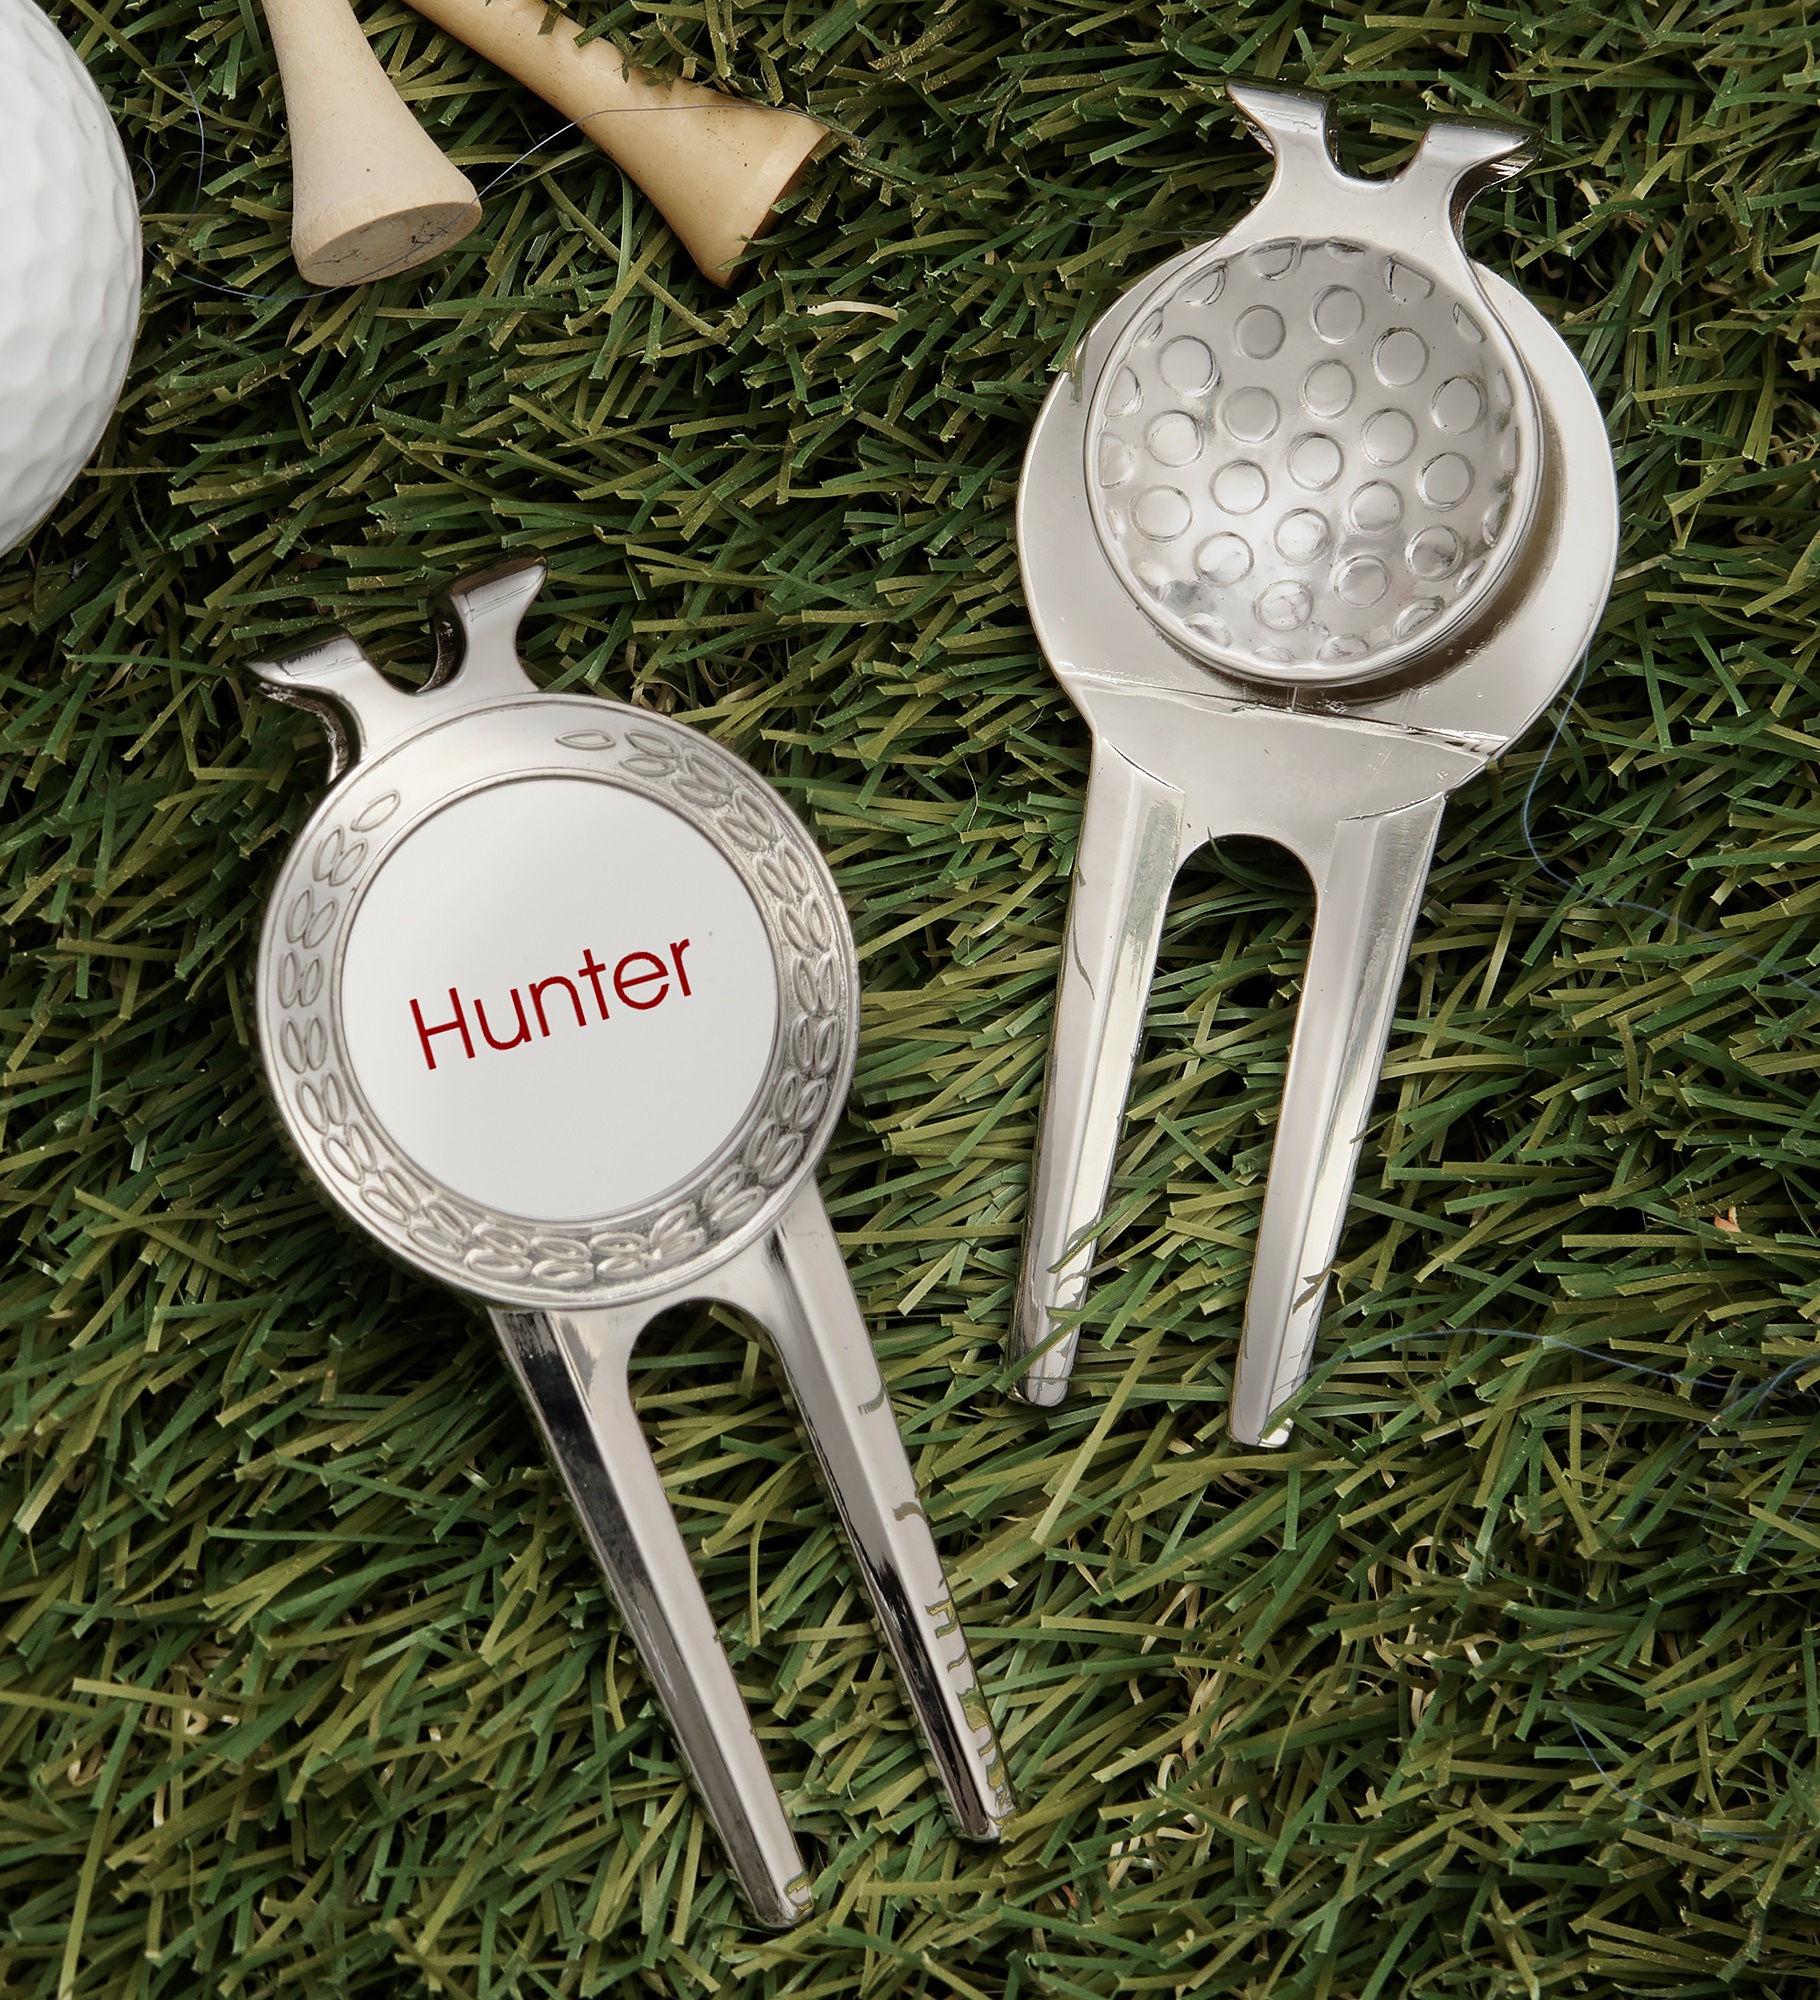 Classic Celebrations Personalized Divot Tool, Ball Marker & Clip